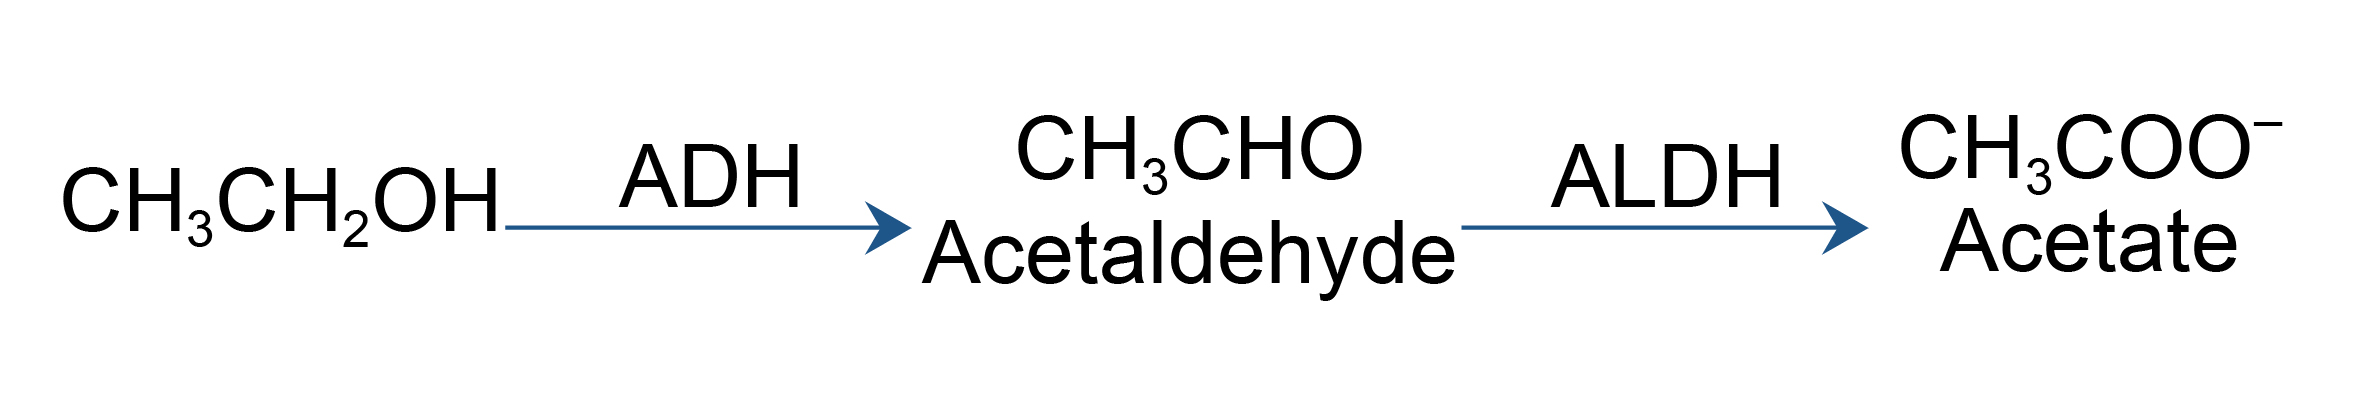 Ethanol (CH3CH2OH) is broken down by alcohol dehydrogenase (ADH) to acetaldehyde (CH3CHO). Acetaldehyde is then broken down by aldehyde dehydrogenase (ALDH) to acetate (CH3COO-).